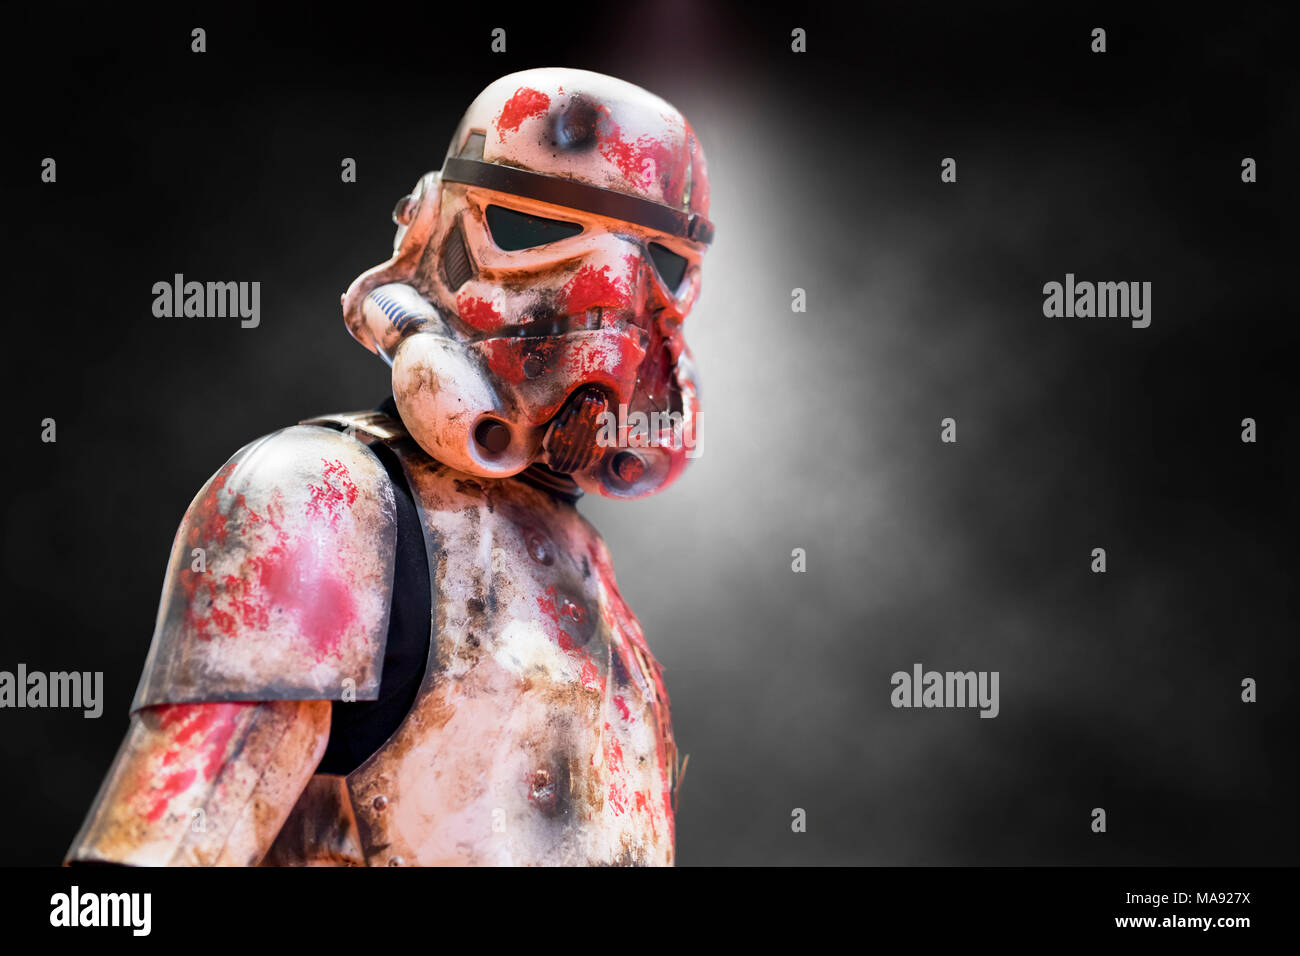 Birmingham, UK - March 17, 2018. A cosplayer dressed as a battered, bloodied and war torn Storm Trooper costume from Star Wars movies at a comic con i Stock Photo